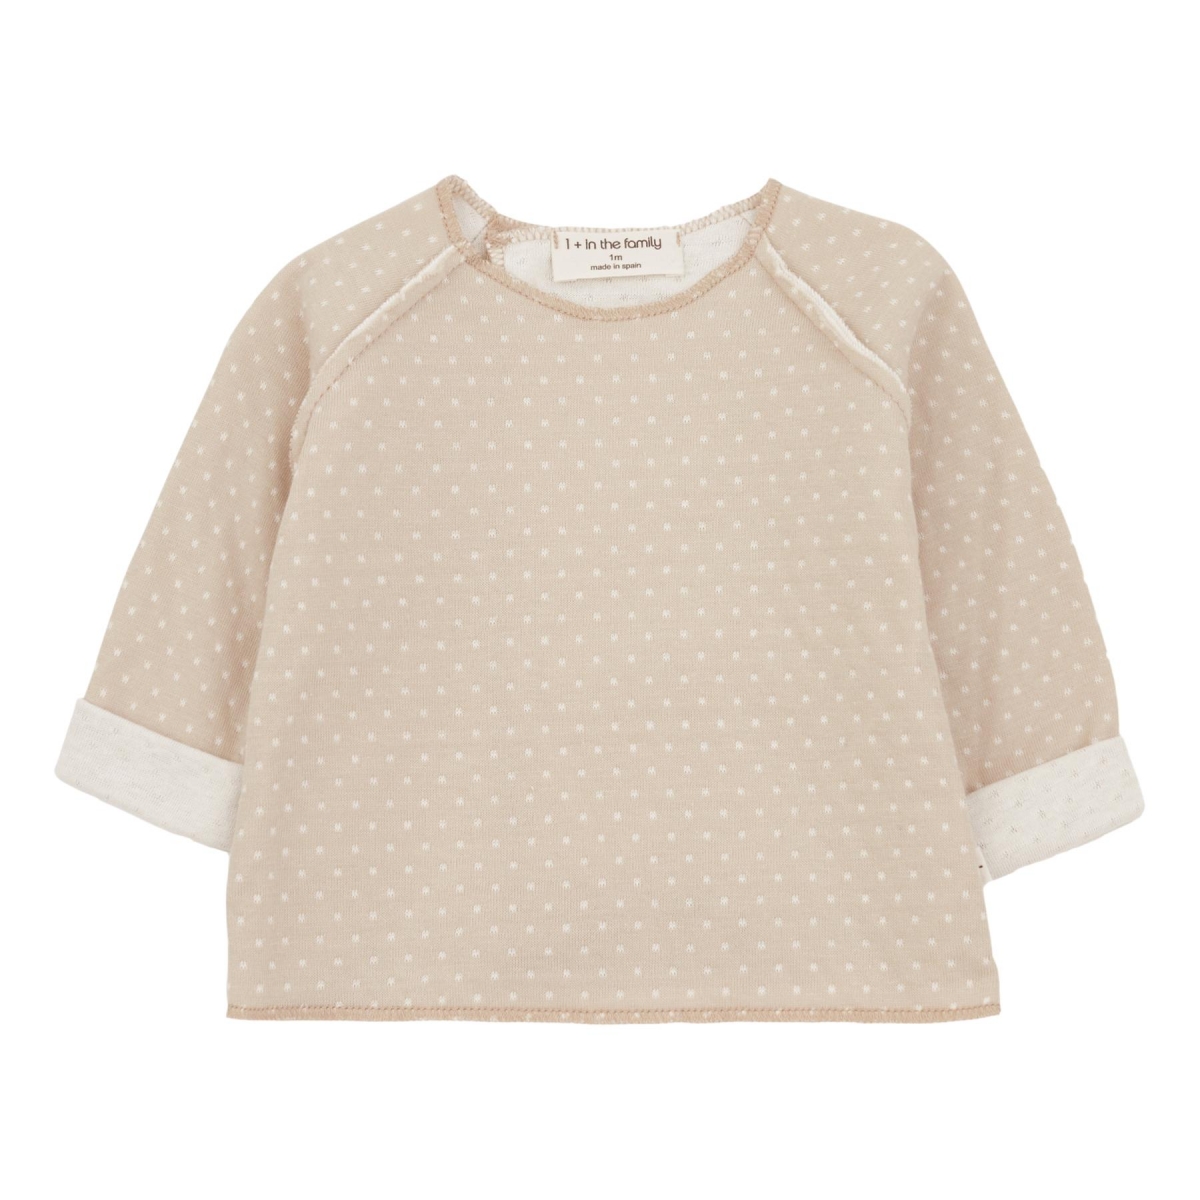 1 + in the family - Sweter Emmanuel Beżowy - Swetry i kardigany - SS21-EMMANUEL-BEIGE 